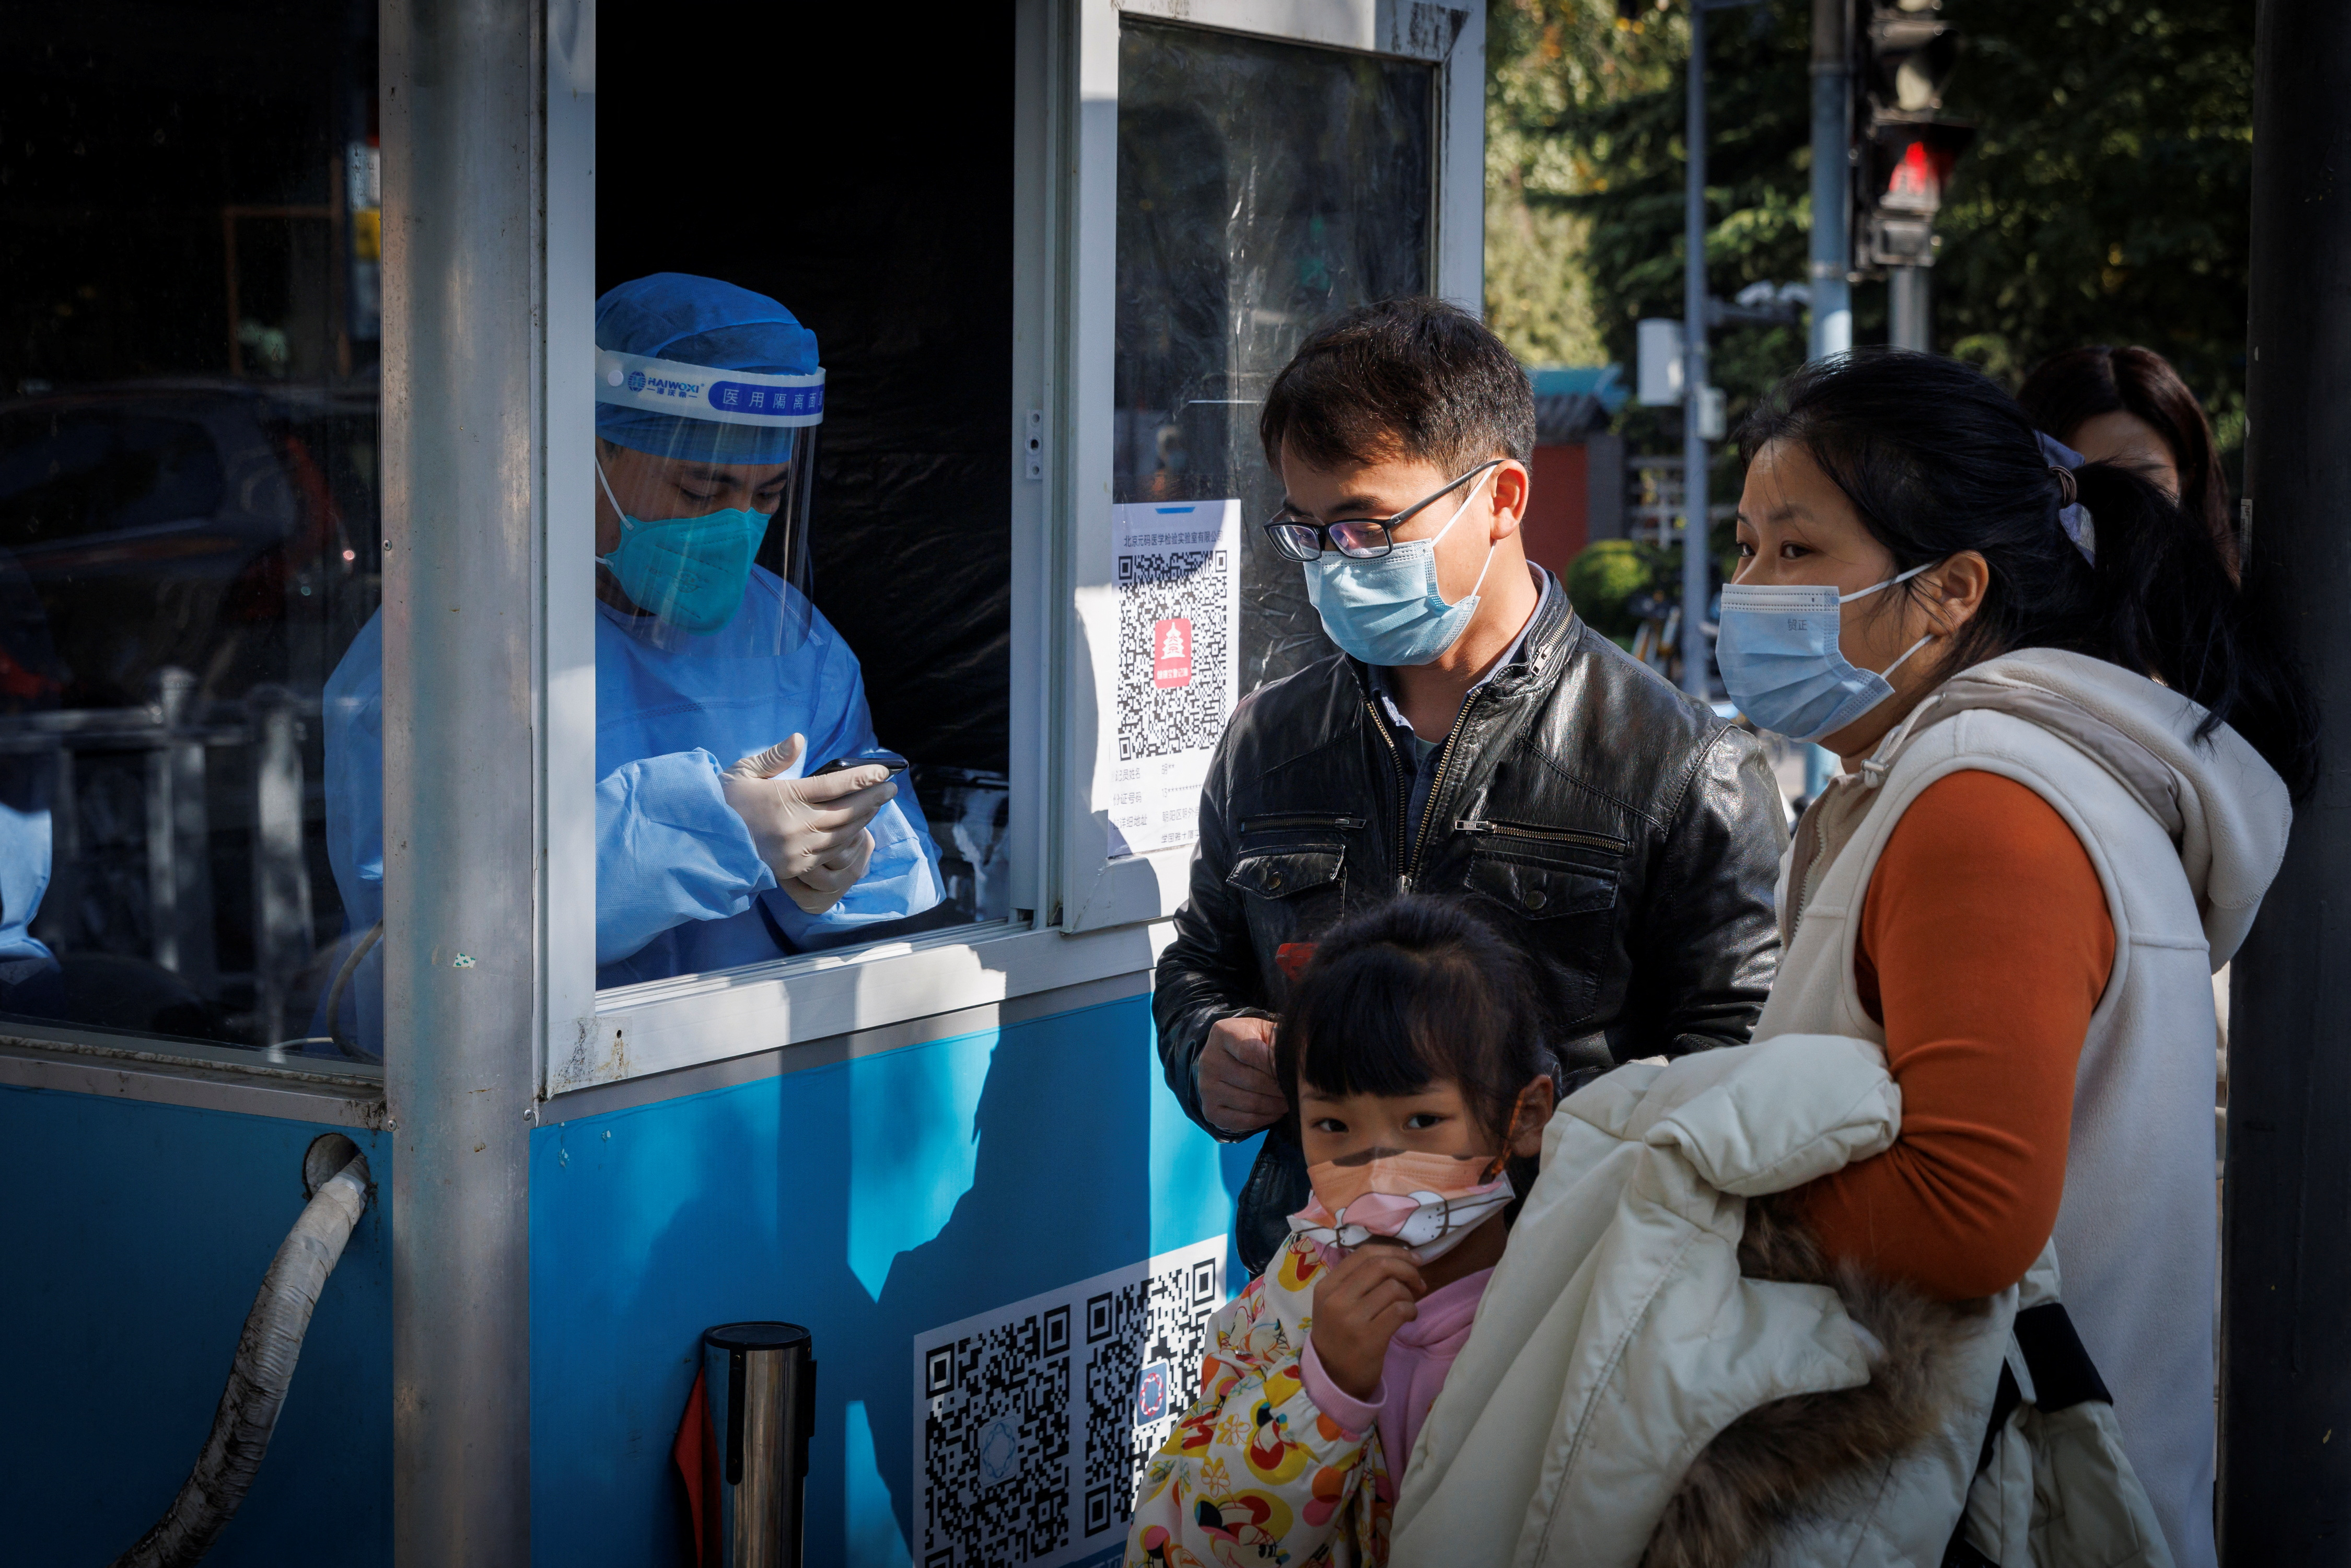 A pandemic prevention worker records personal details of people as they line up to get a swab test at a testing booth as outbreaks of coronavirus disease (COVID-19) continue in Beijing